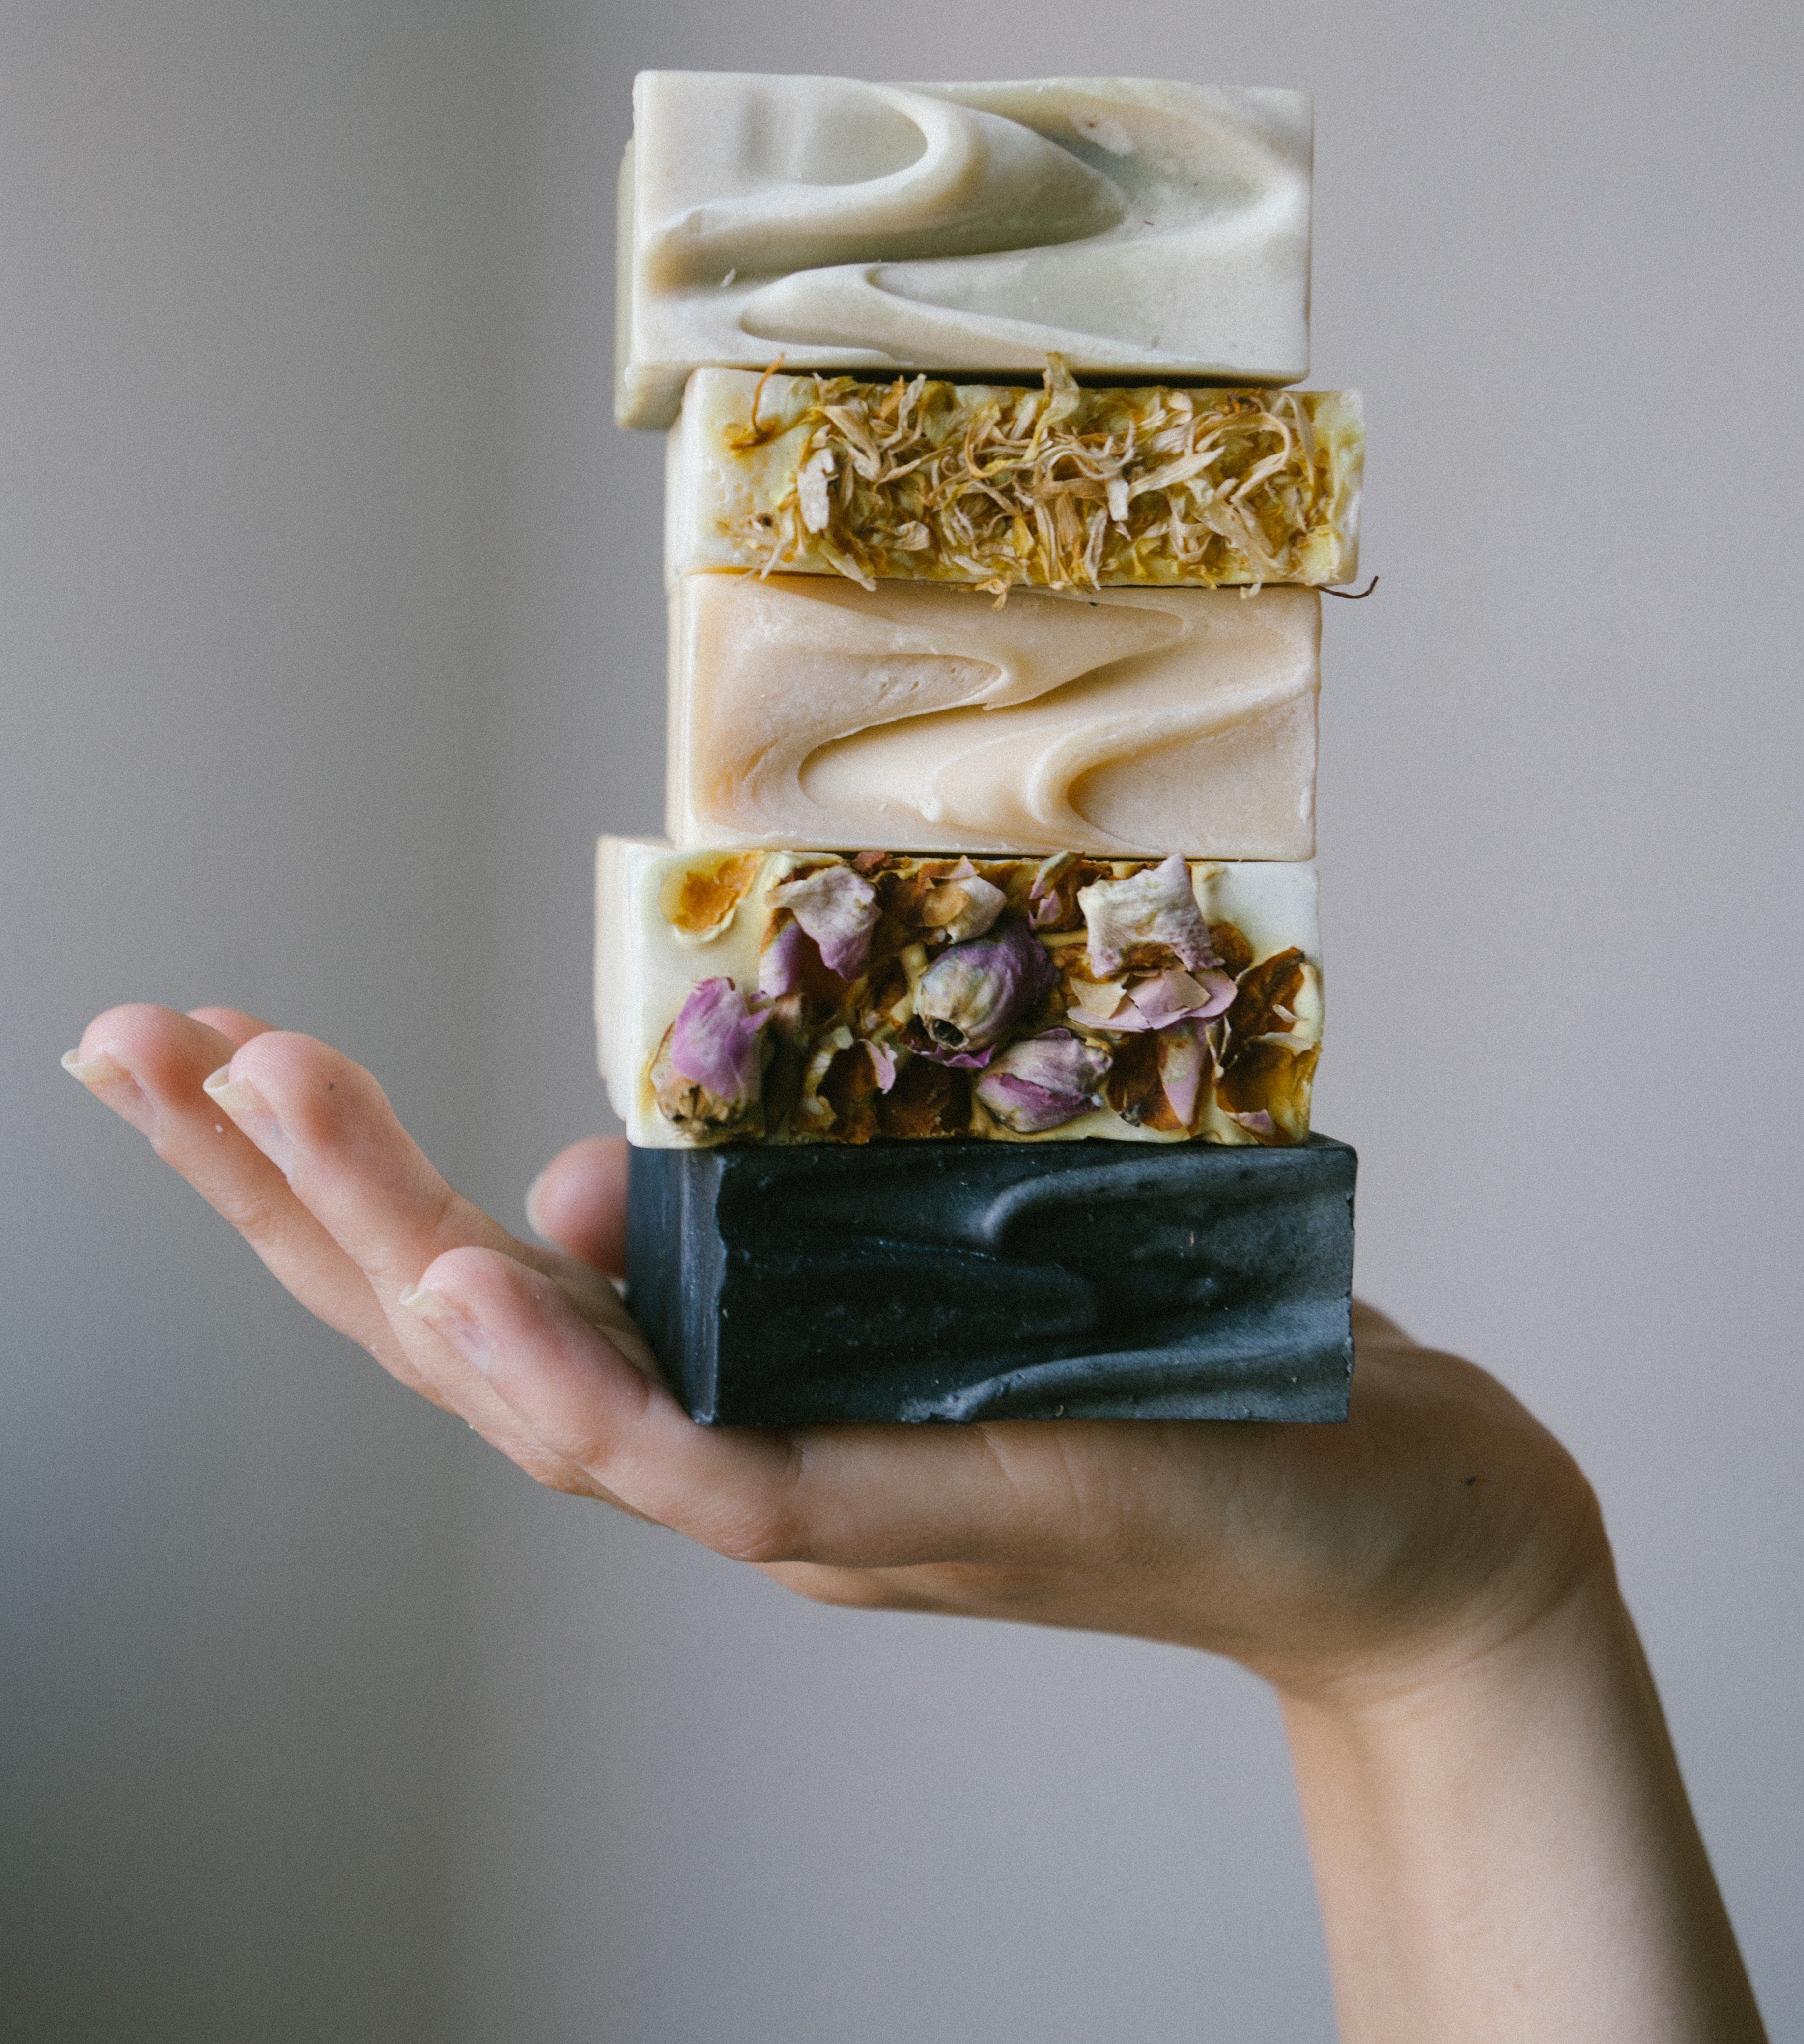 Handmade Soap: A Detailed Guide to Ingredients, Benefits, and Uses